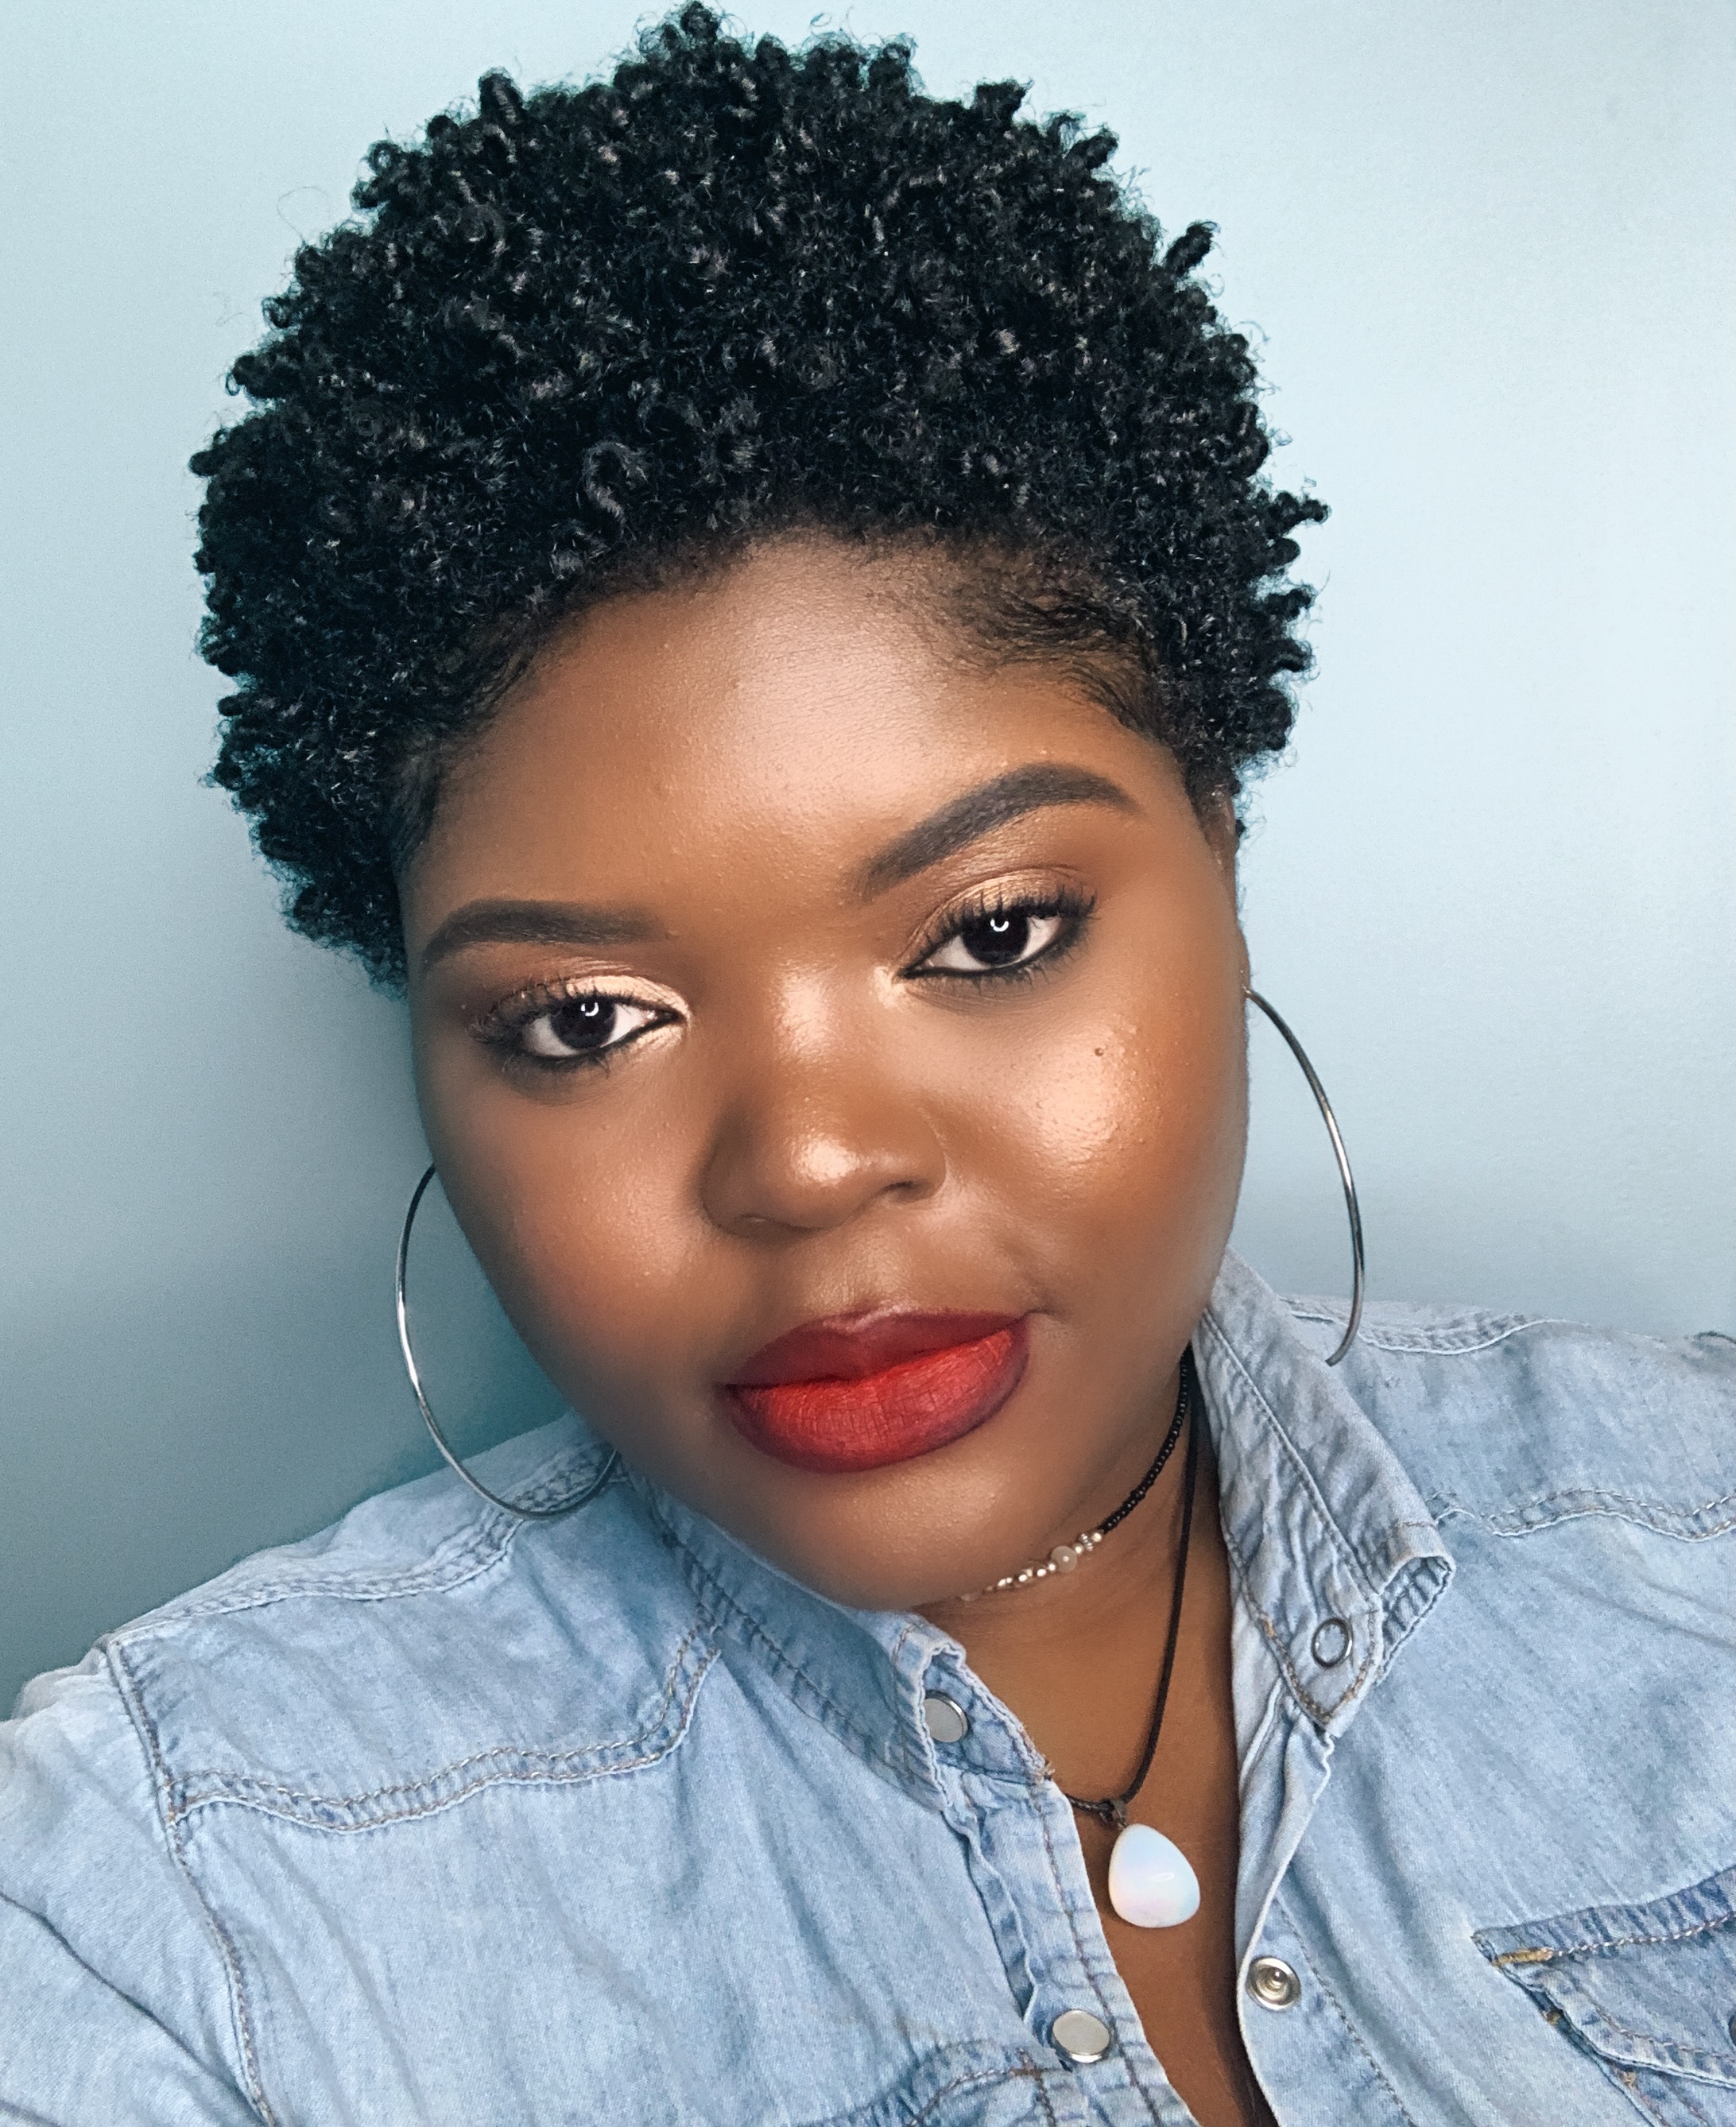 15 Black Beauty Bloggers Share Their Favorite Red Lipstick